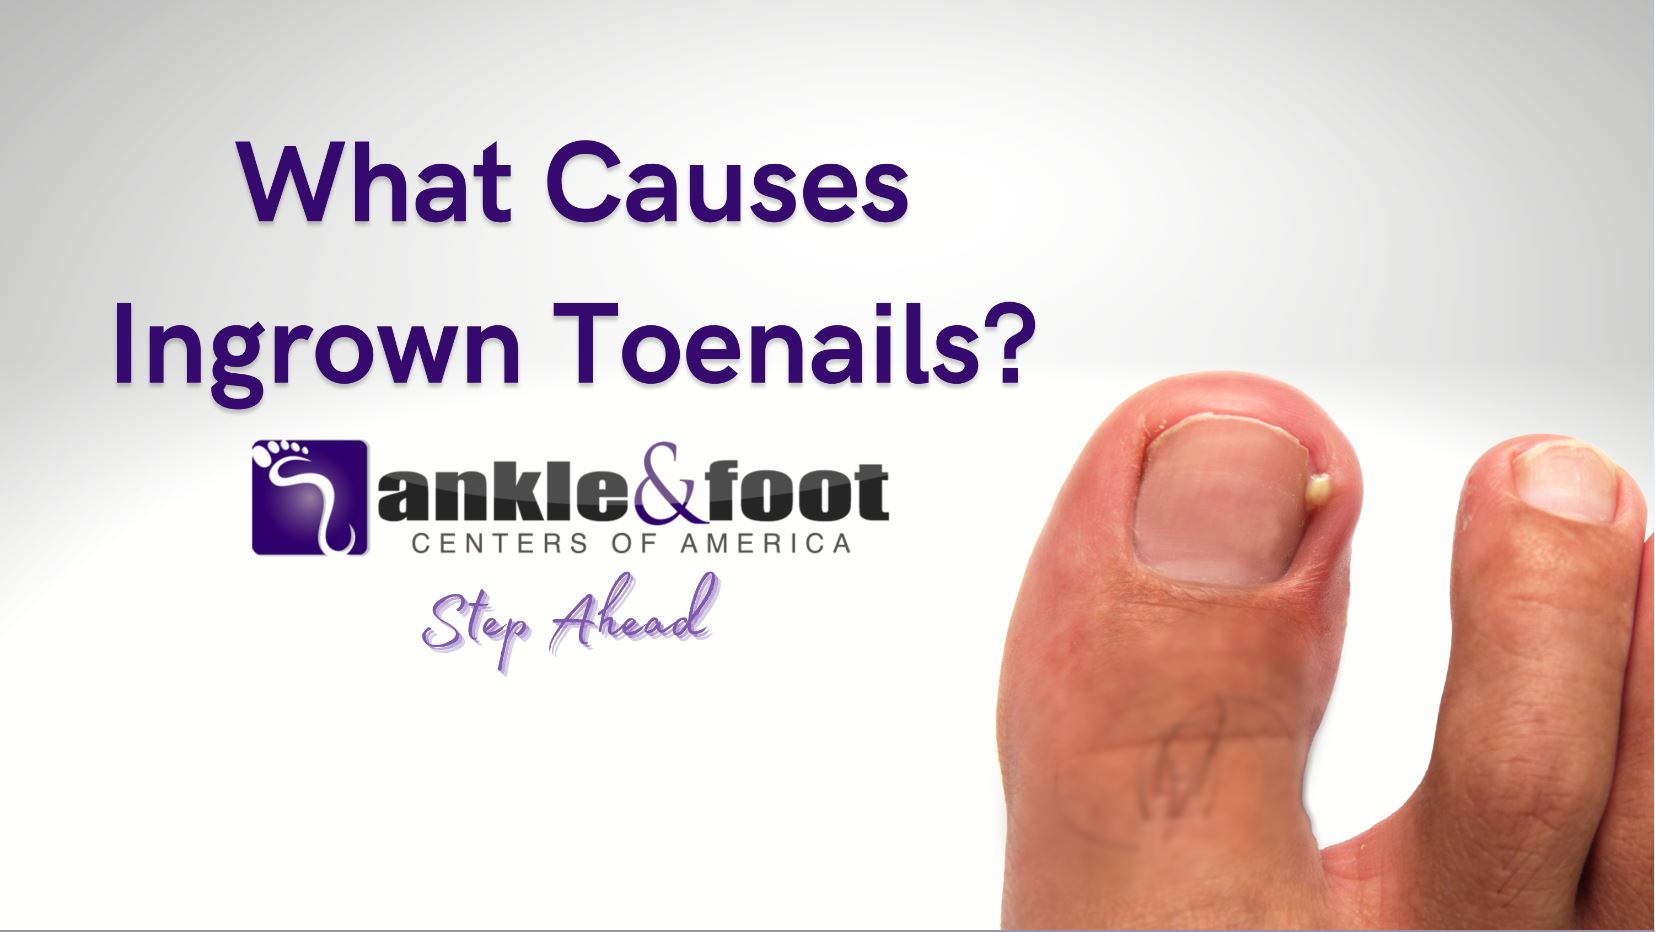 https://ankleandfootcenters.com/wp-content/uploads/2023/02/What-Causes-Ingrown-Toenails.jpg